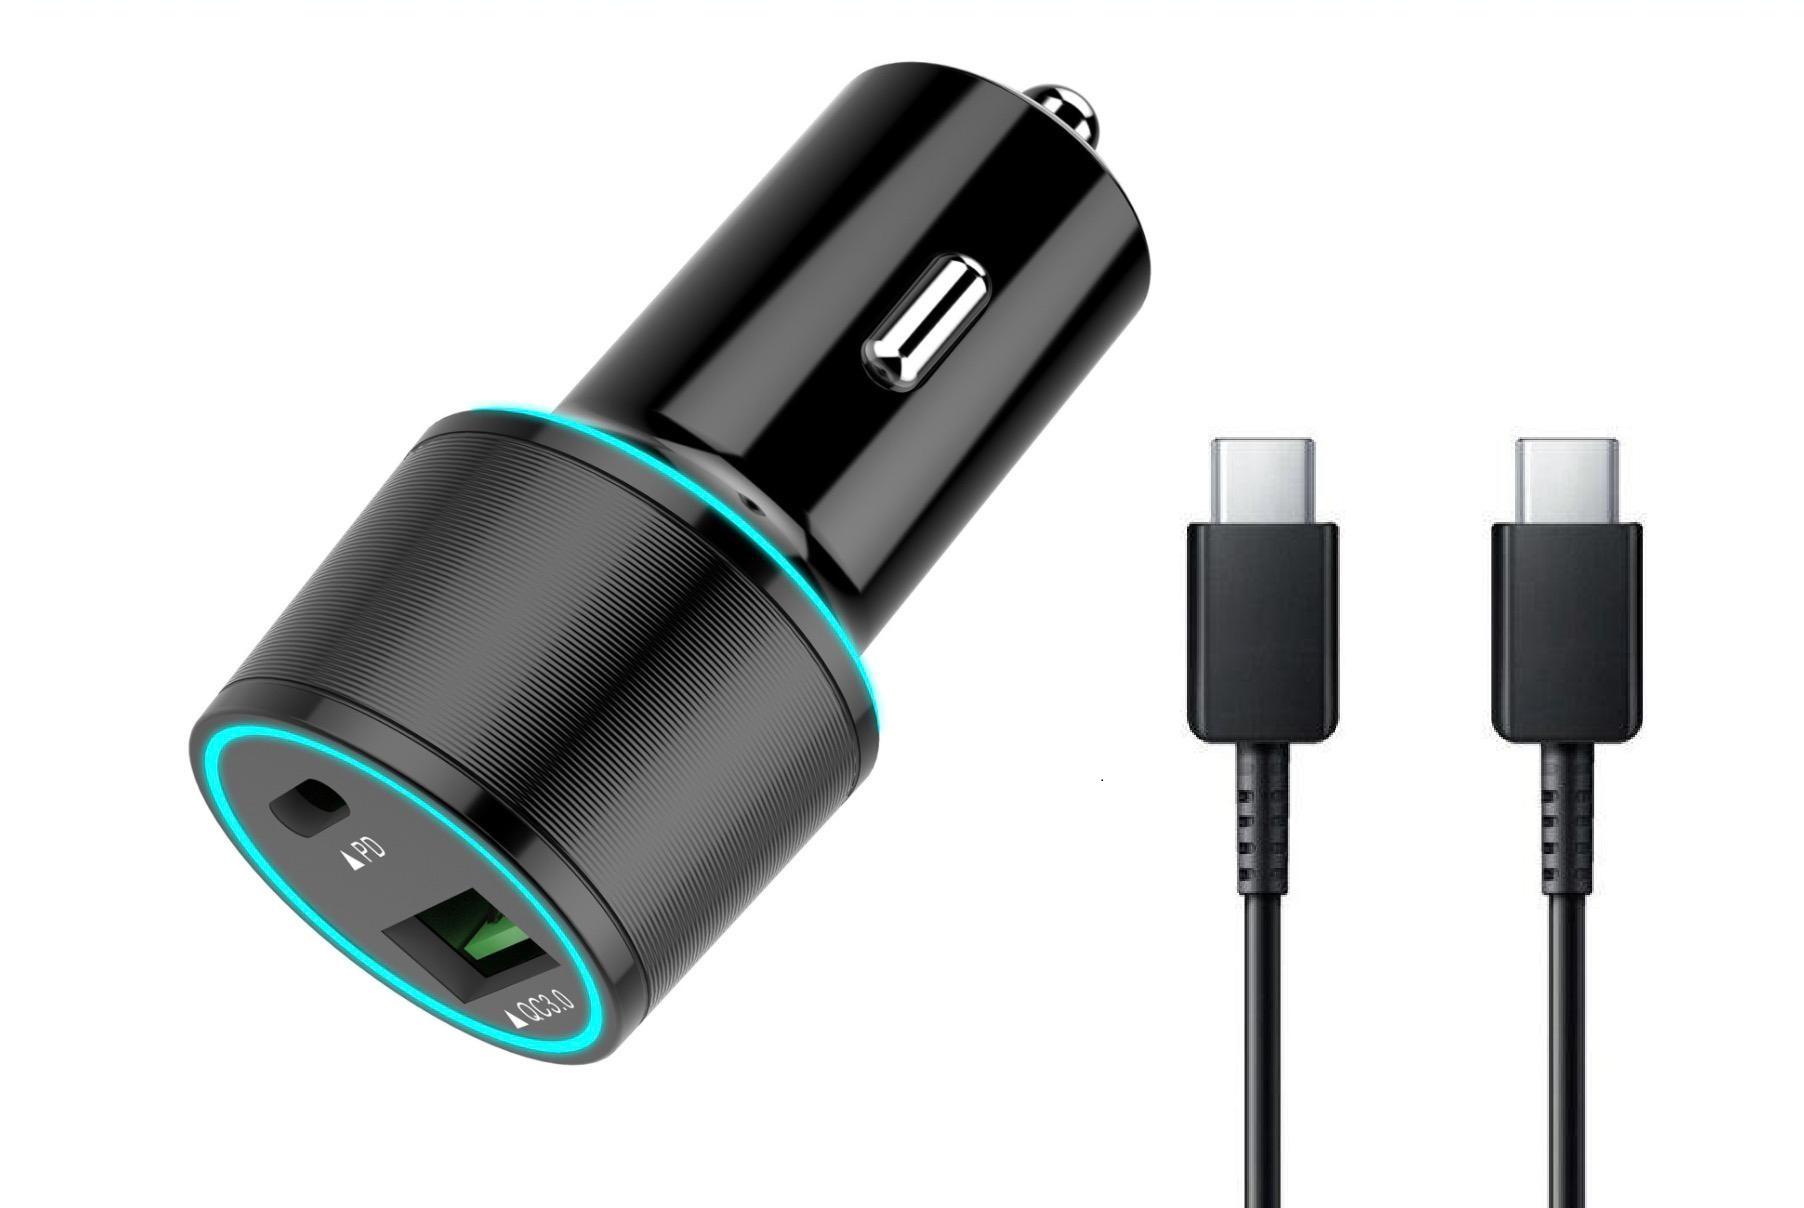 USB C Car Charger UrbanX 20W Car and Truck Charger For BLU Vivo XI+ with Power Delivery 3.0 Cigarette Lighter USB Charger - Black, Comes with USB C to USB C PD Cable 3.3FT 1M - image 1 of 3